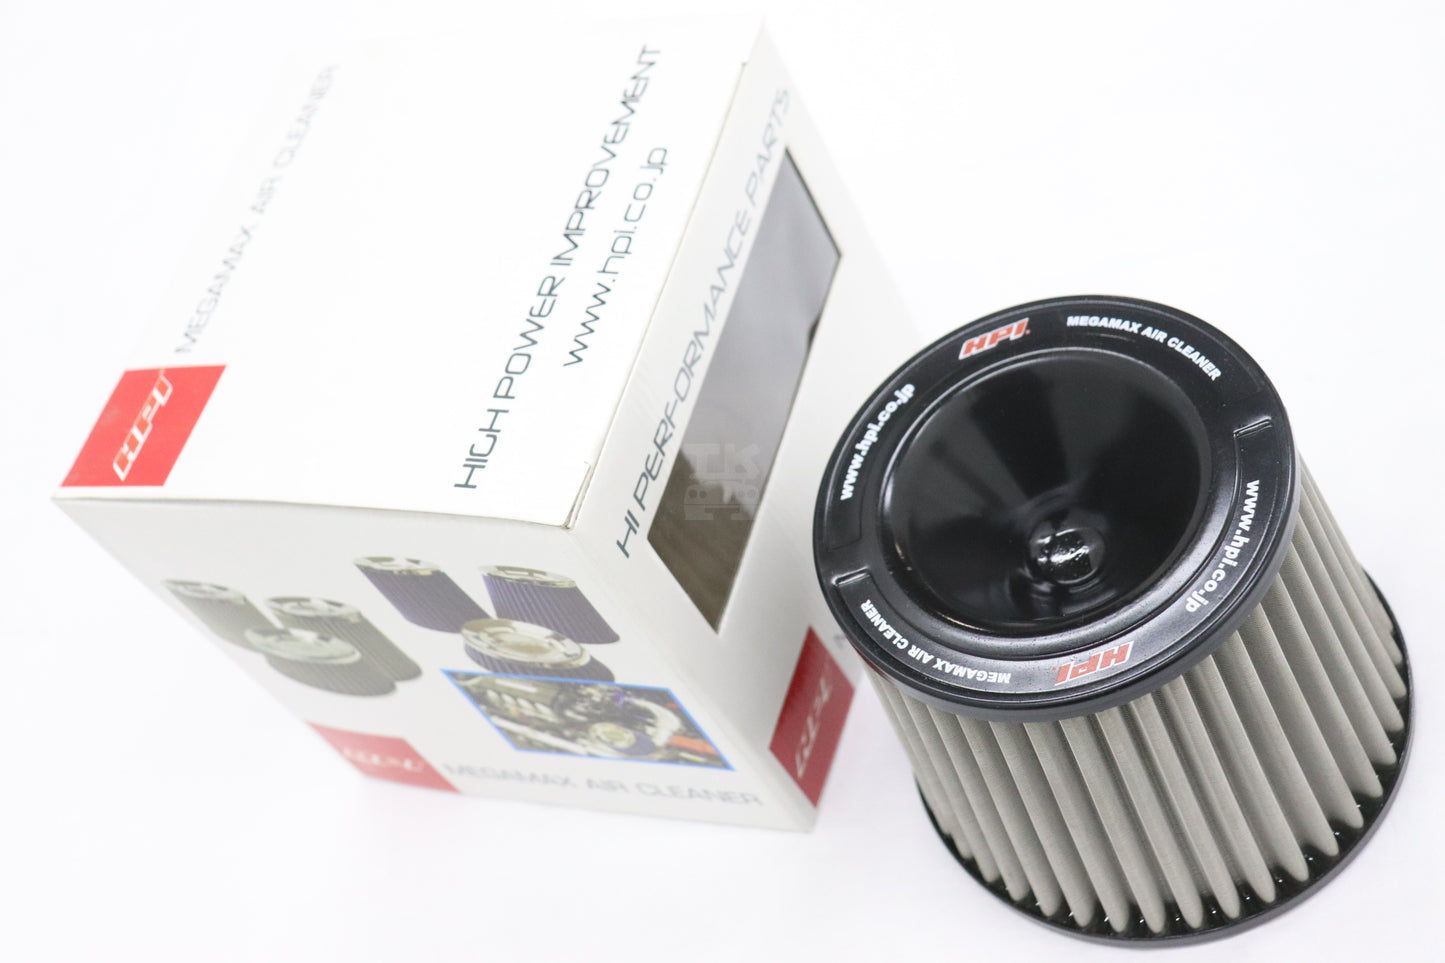 HPI Megamax Air Cleaner Stainless R20 Air Flow Standard Core ##178122299